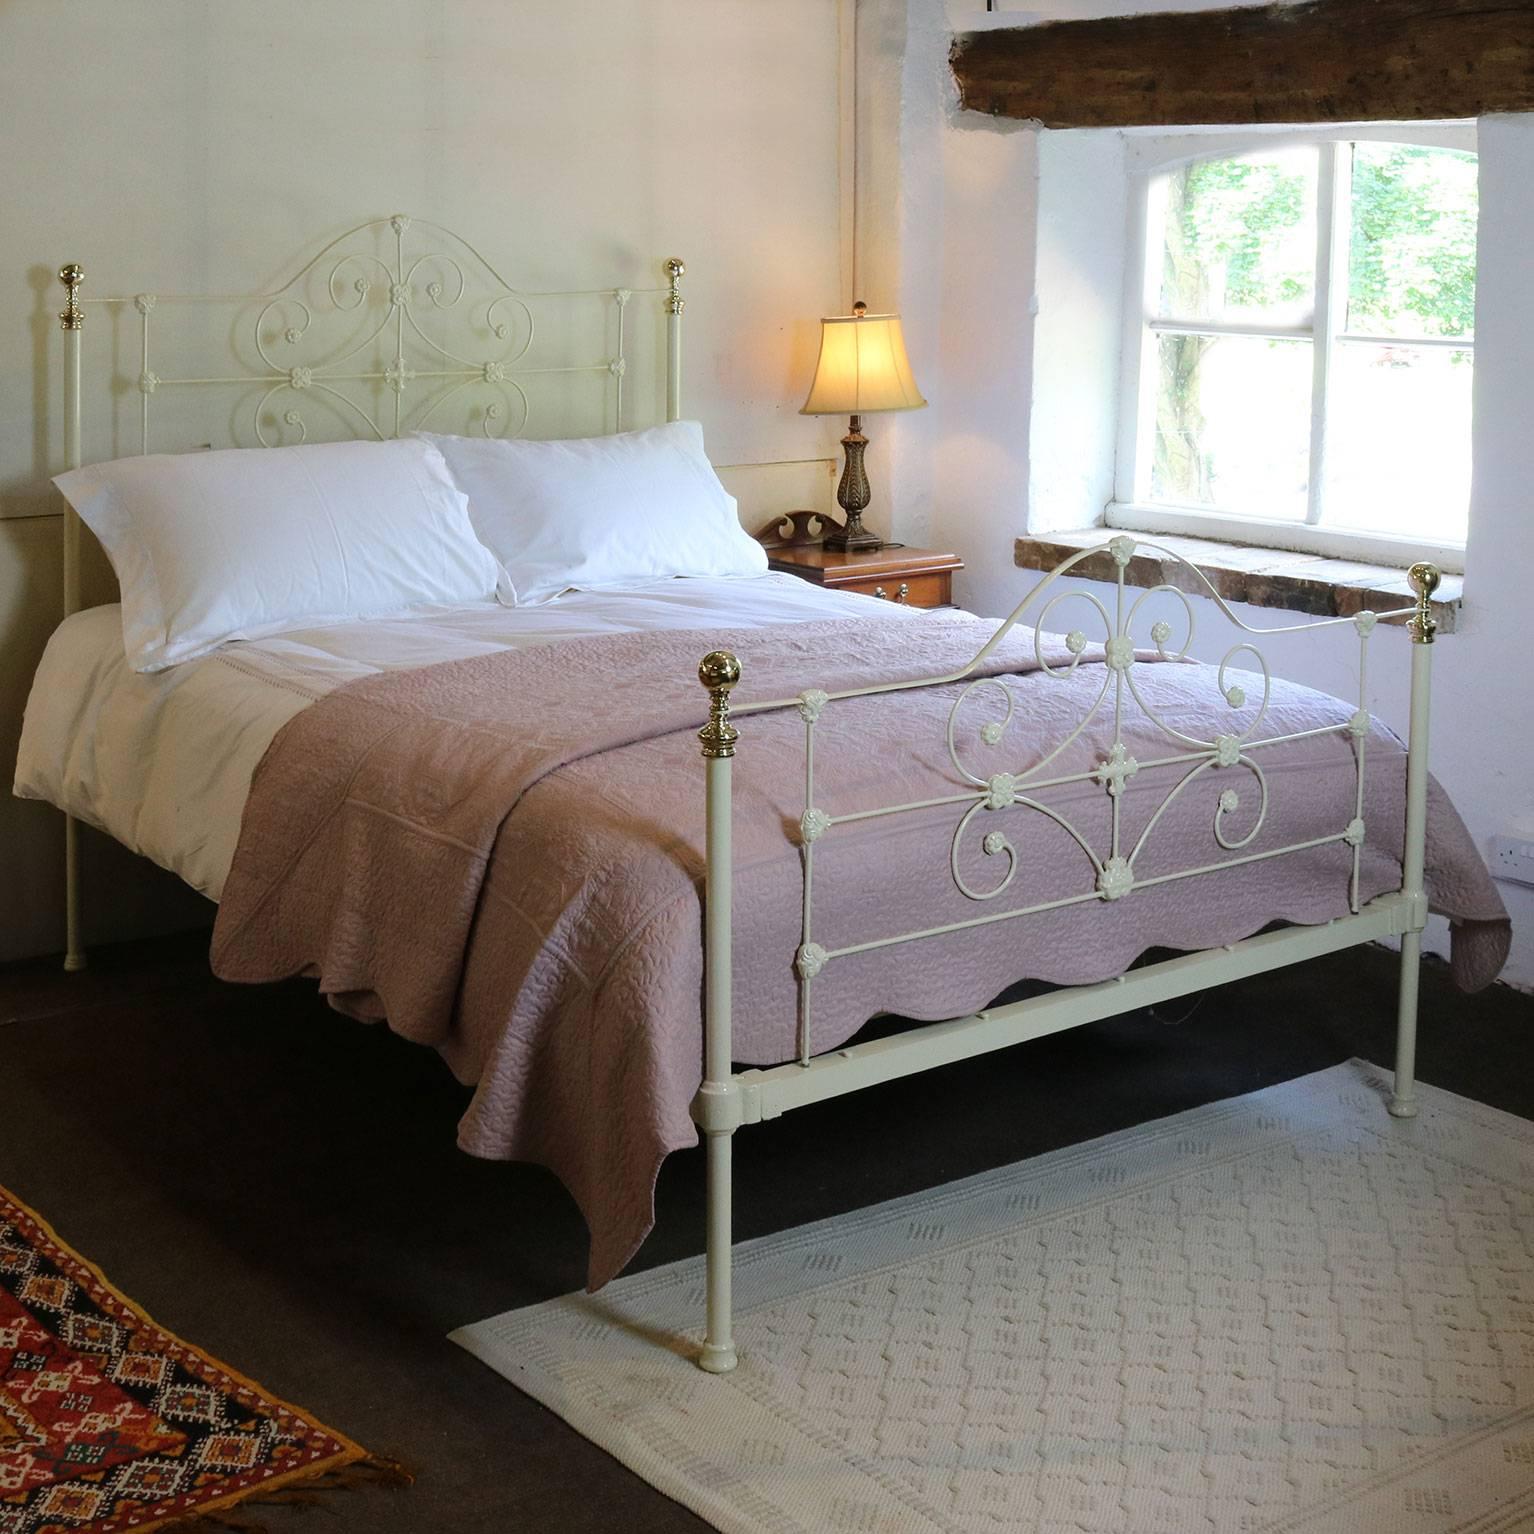 An attractive cast iron and brass bed finished in cream with scroll designs in the panels.

This bed accepts a British king-size or American queen-size (60 inches, 5ft or 150cm wide) base and mattress set.

The price is for the bed frame alone.